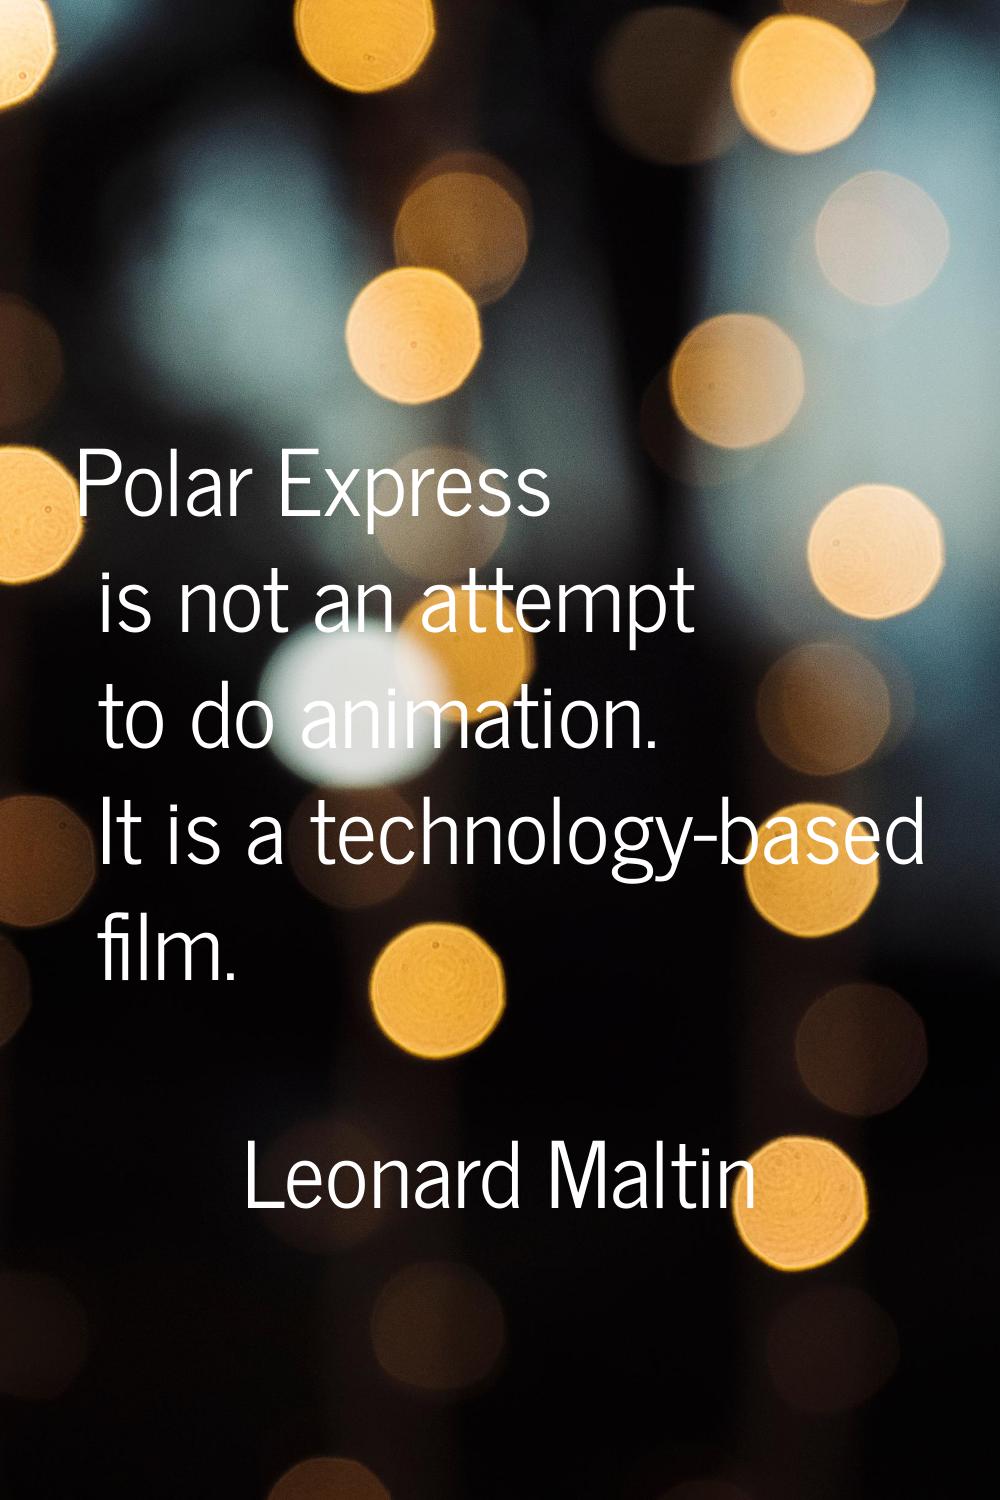 Polar Express is not an attempt to do animation. It is a technology-based film.